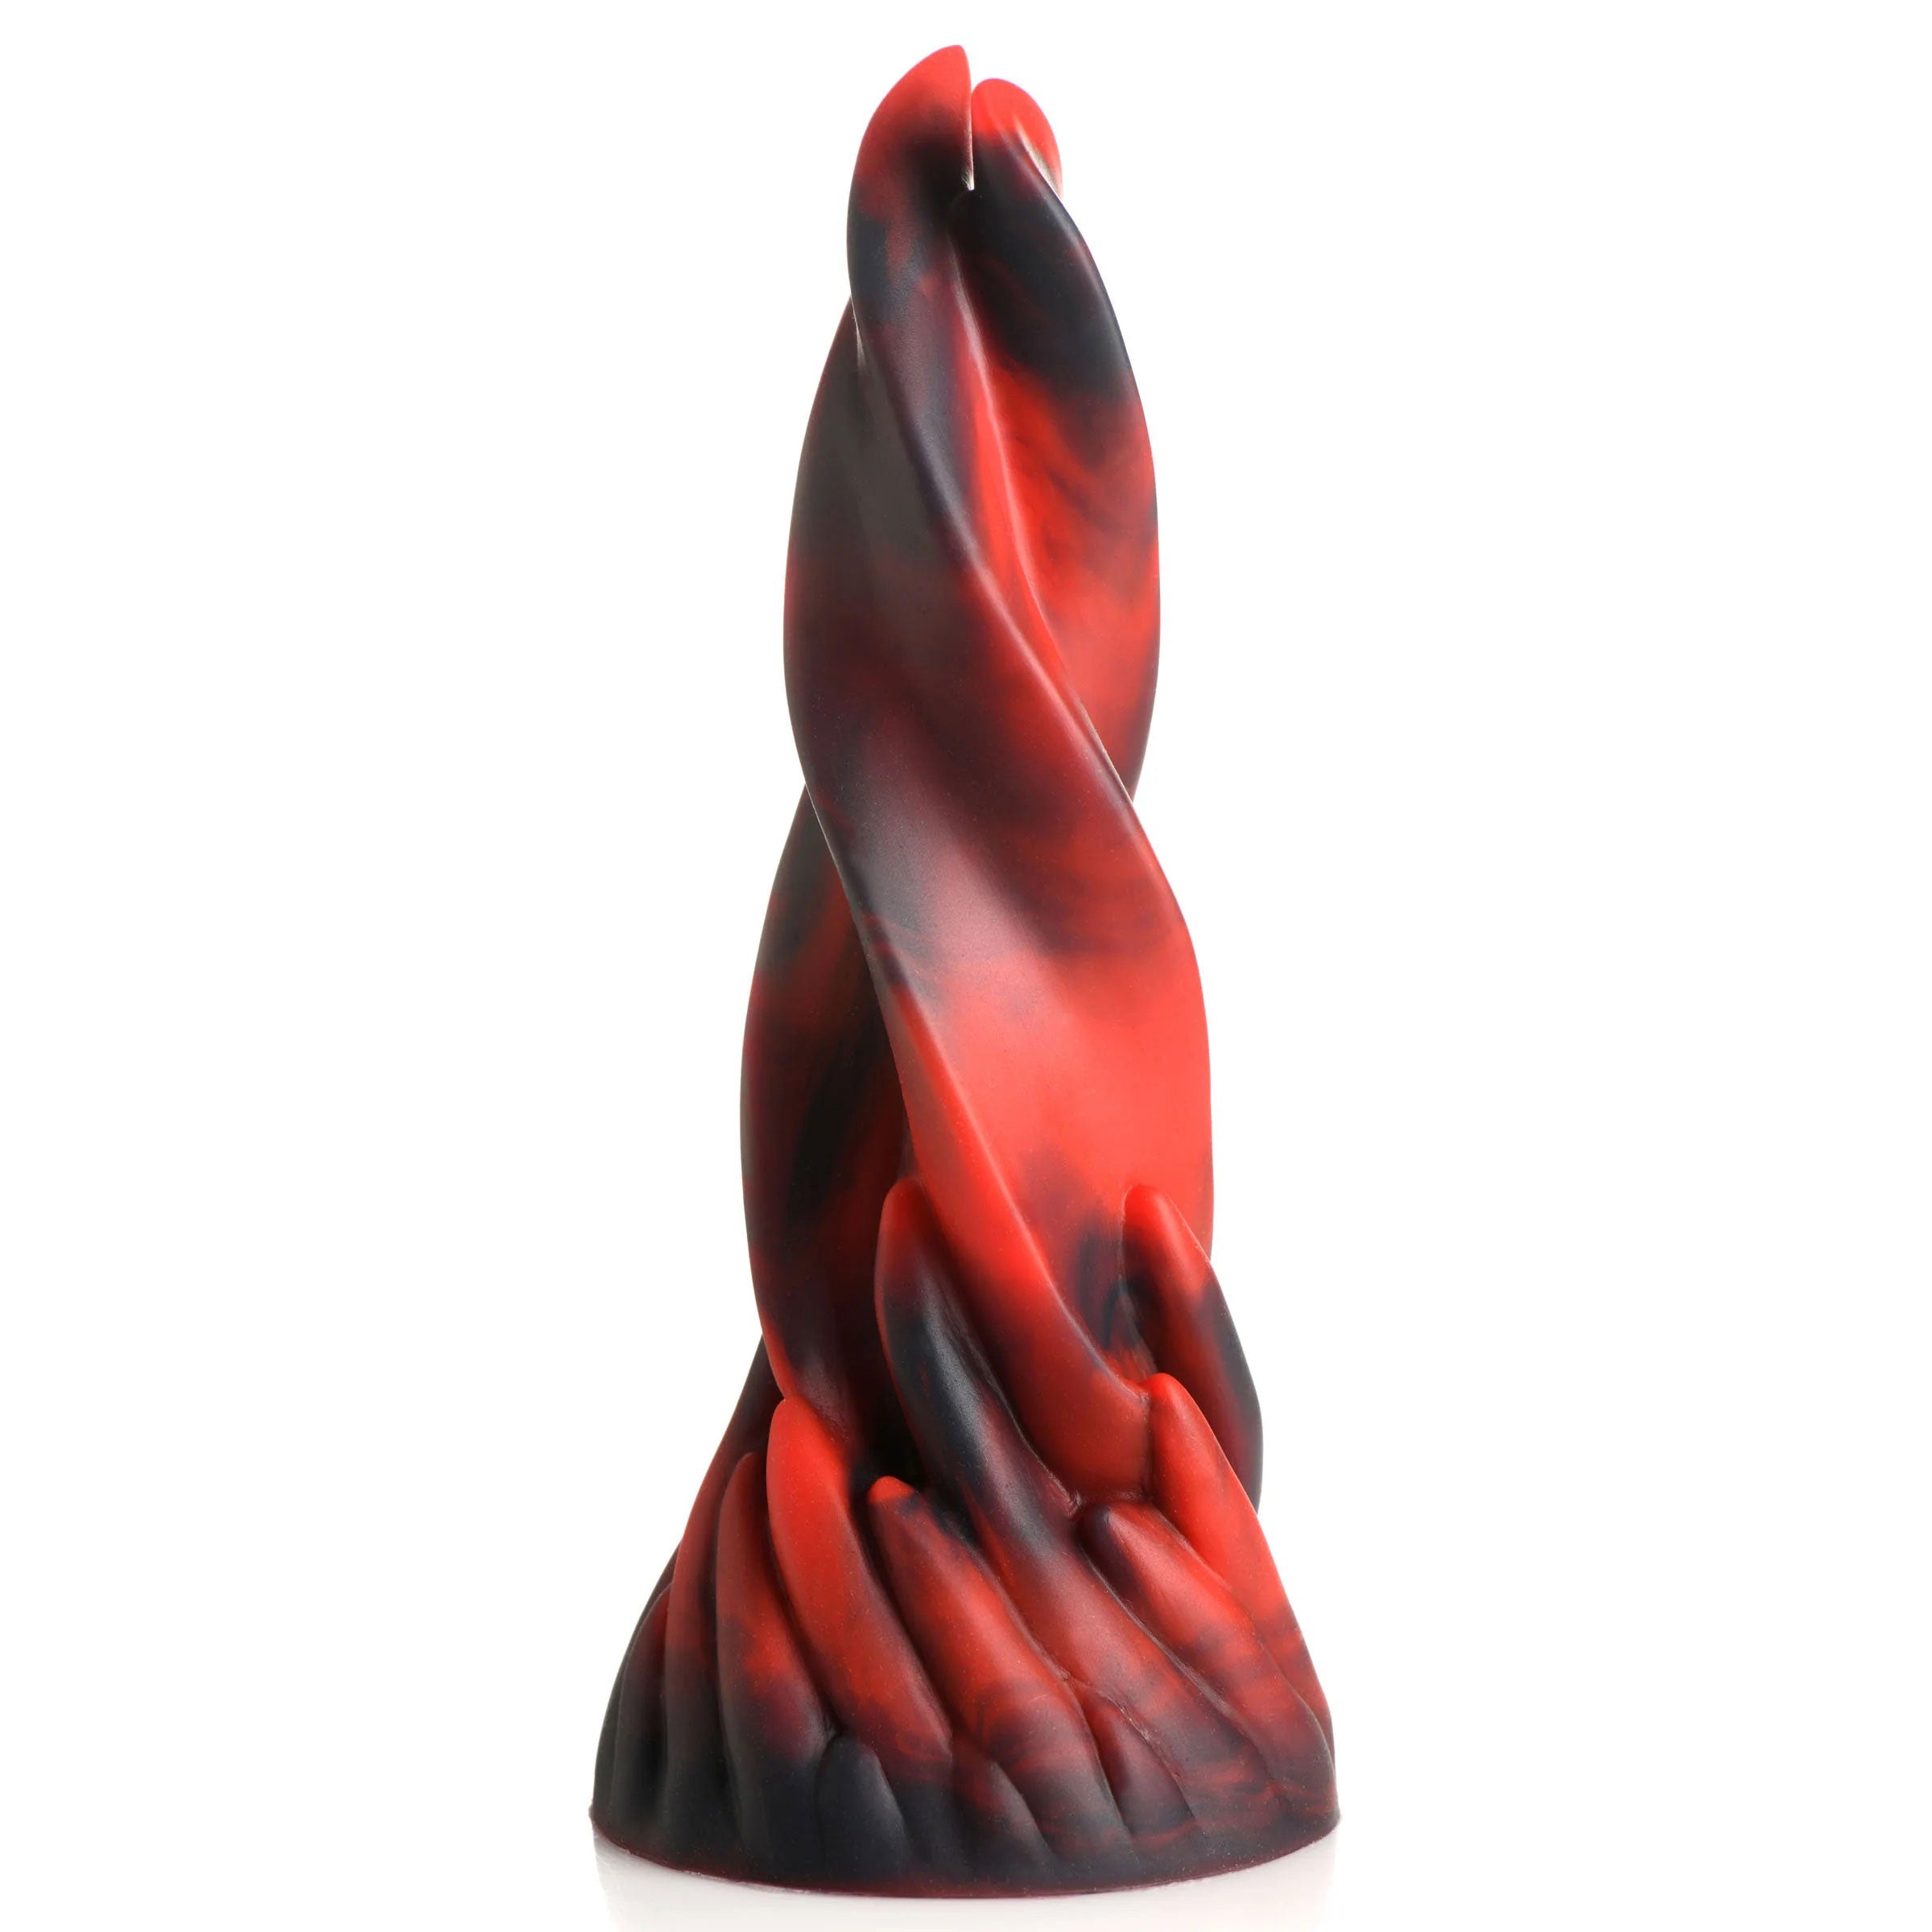 Hell Kiss Twisted Fantasy Dildo made of Silicone by Creature Cocks